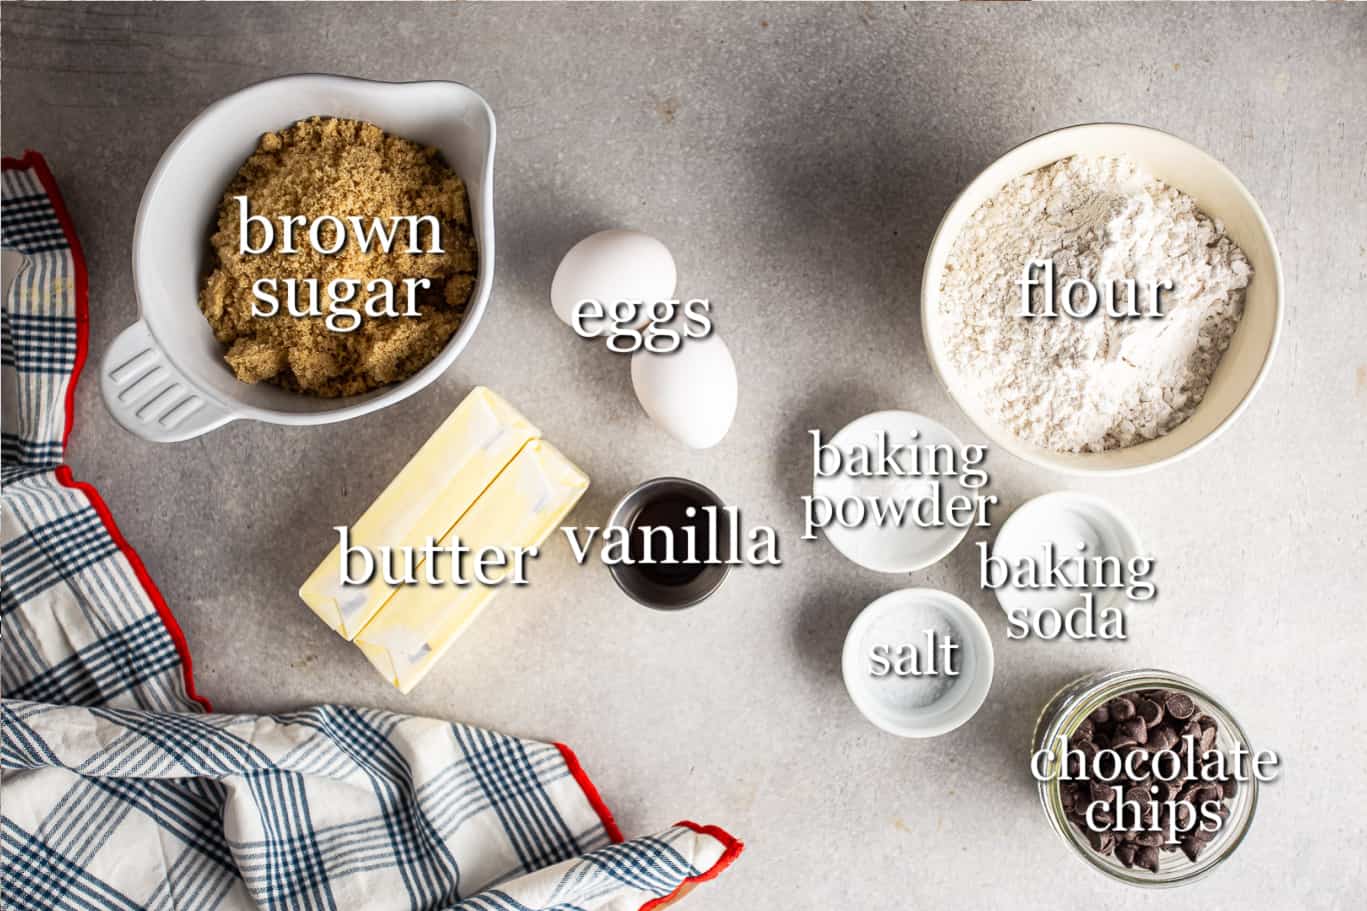 Ingredients for making chocolate chip blondie, with text labels.